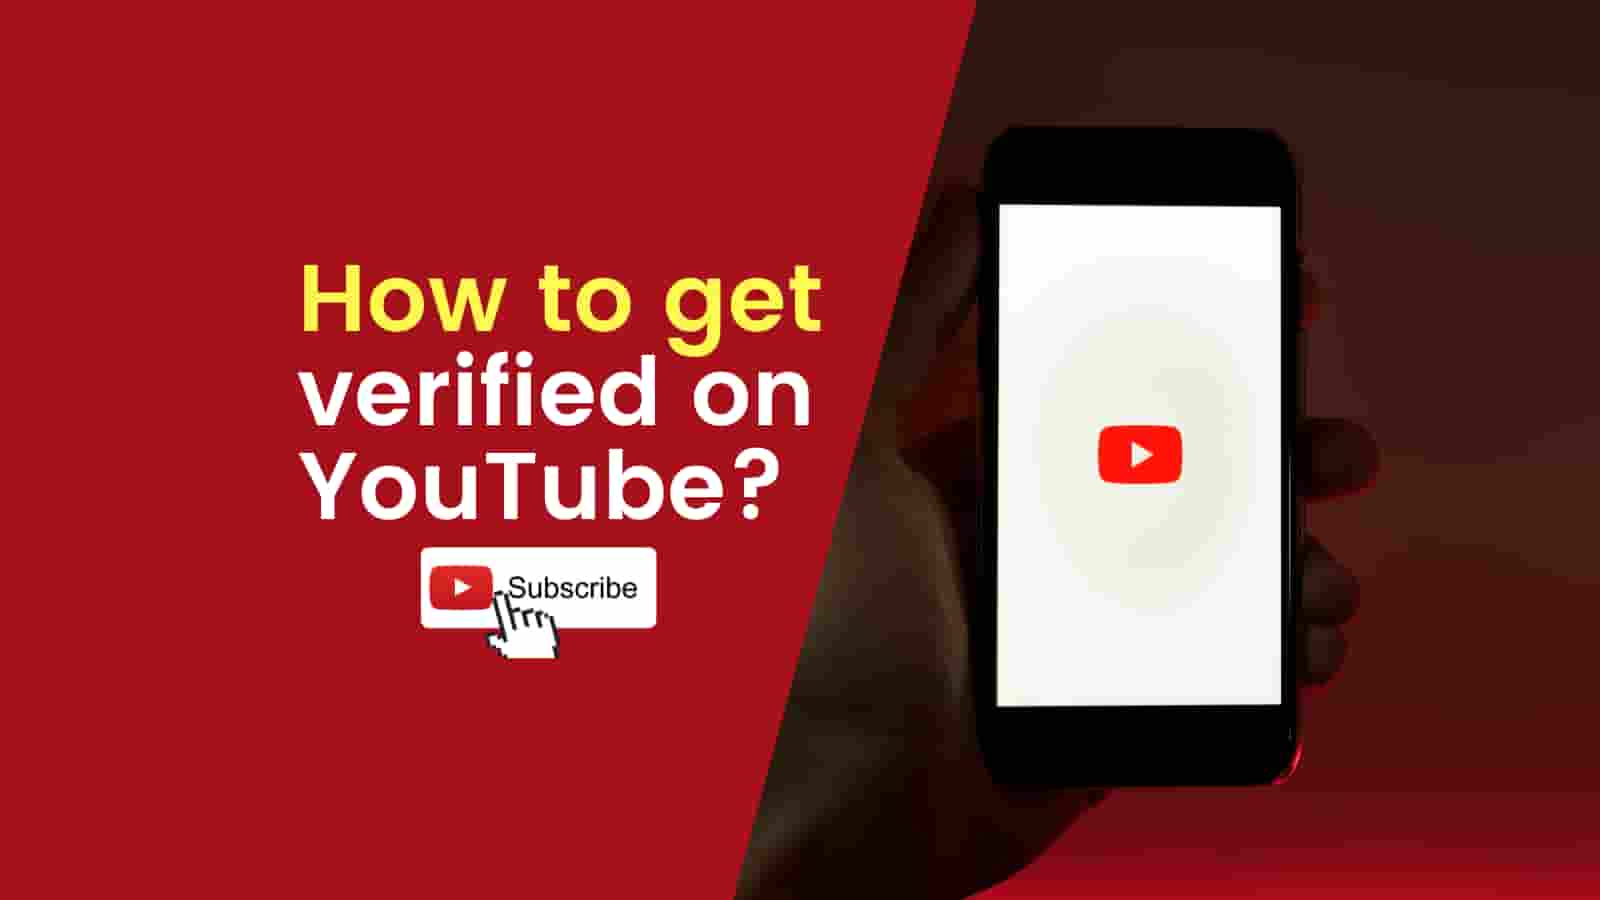 how to get verified on YouTube? easy guide